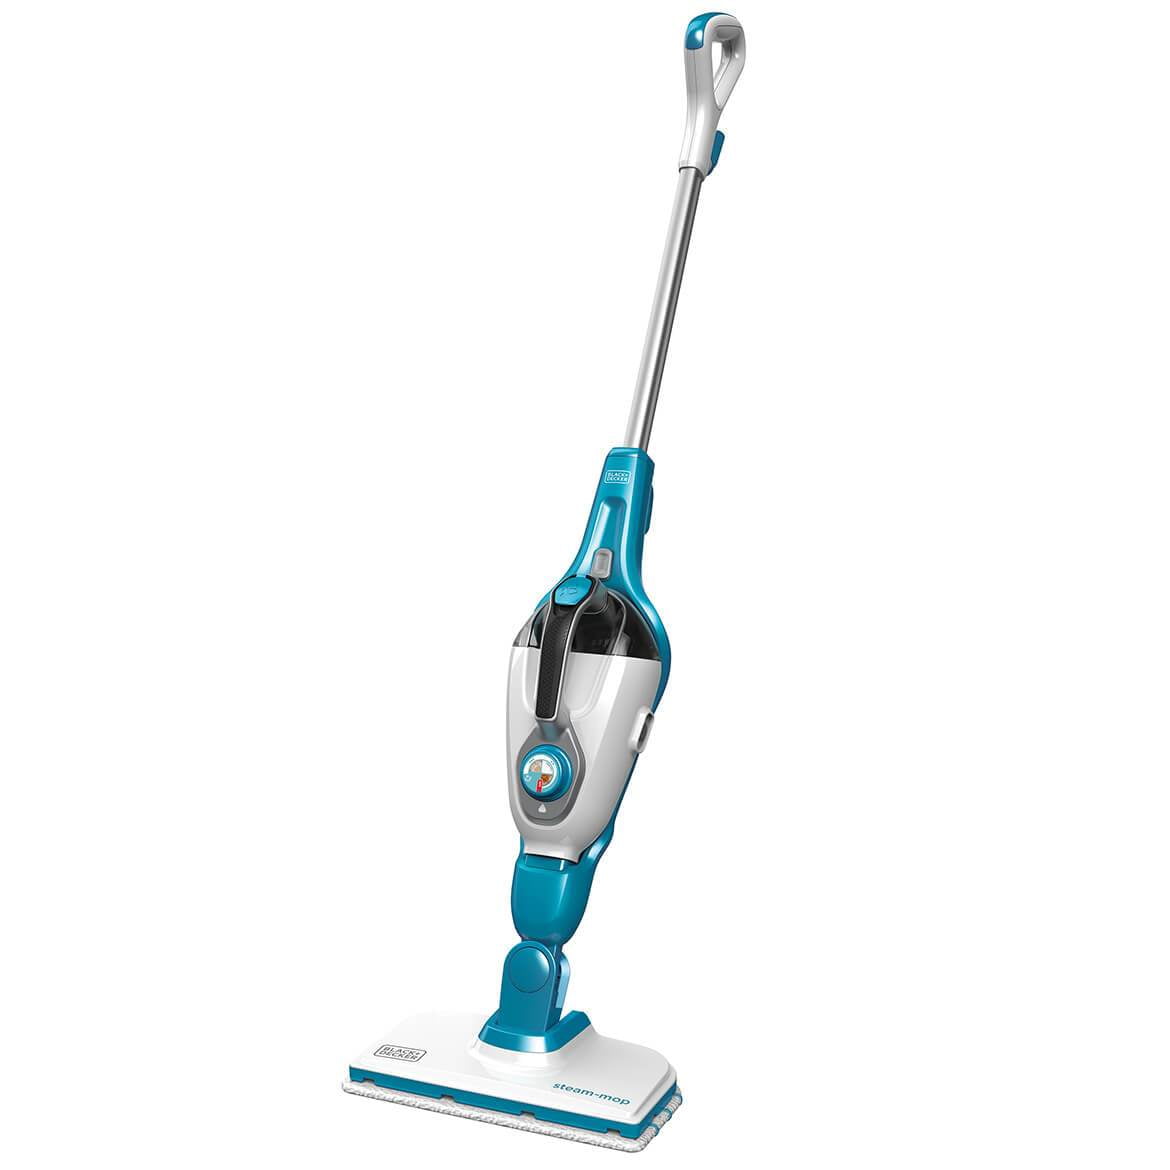 Like New Classic Steam Mop by BLACK+DECKER with 7 wipe clothes